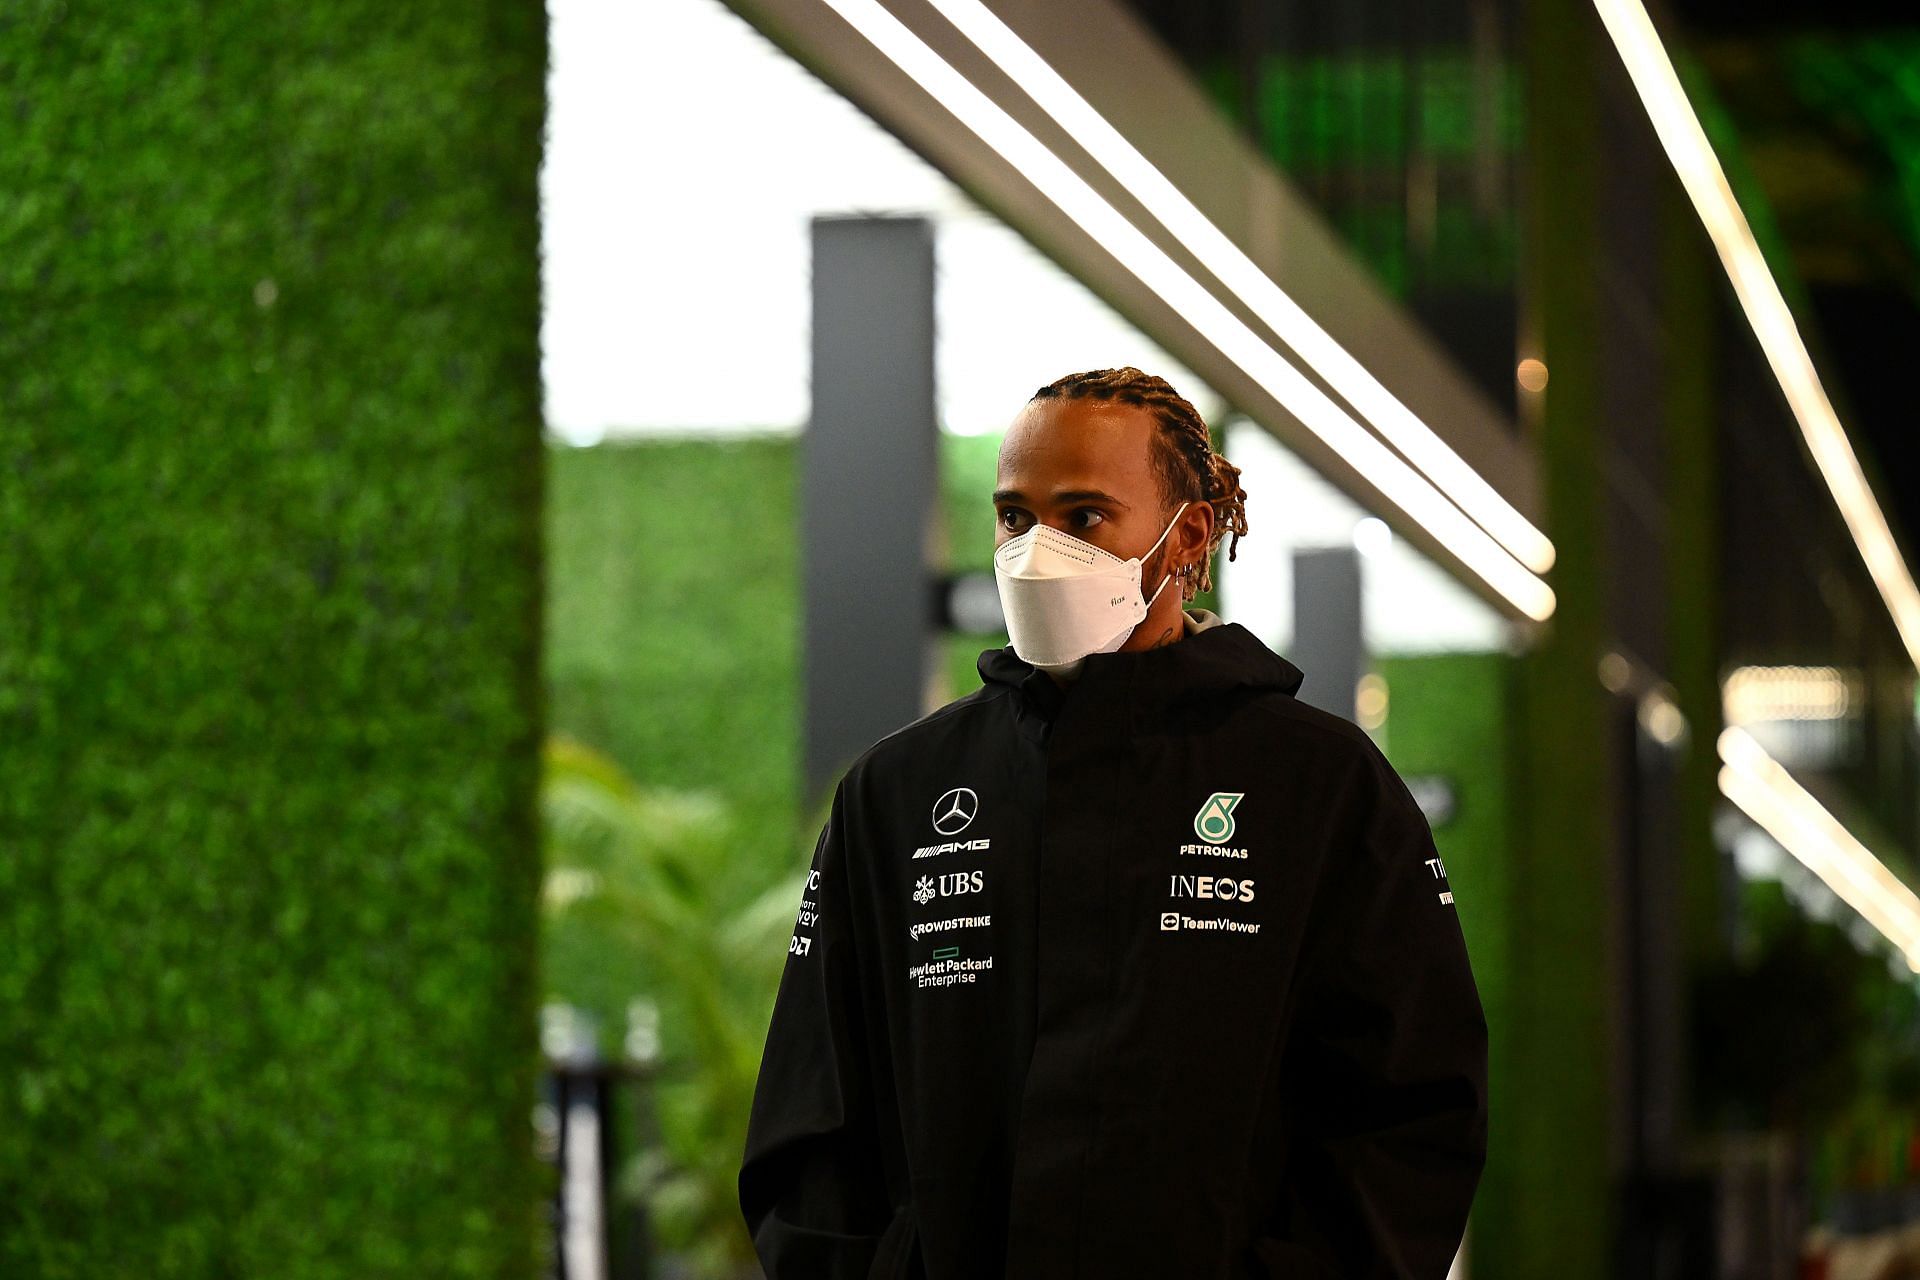 Lewis Hamilton leaves the paddock after the F1 Grand Prix of Saudi Arabia - Practice